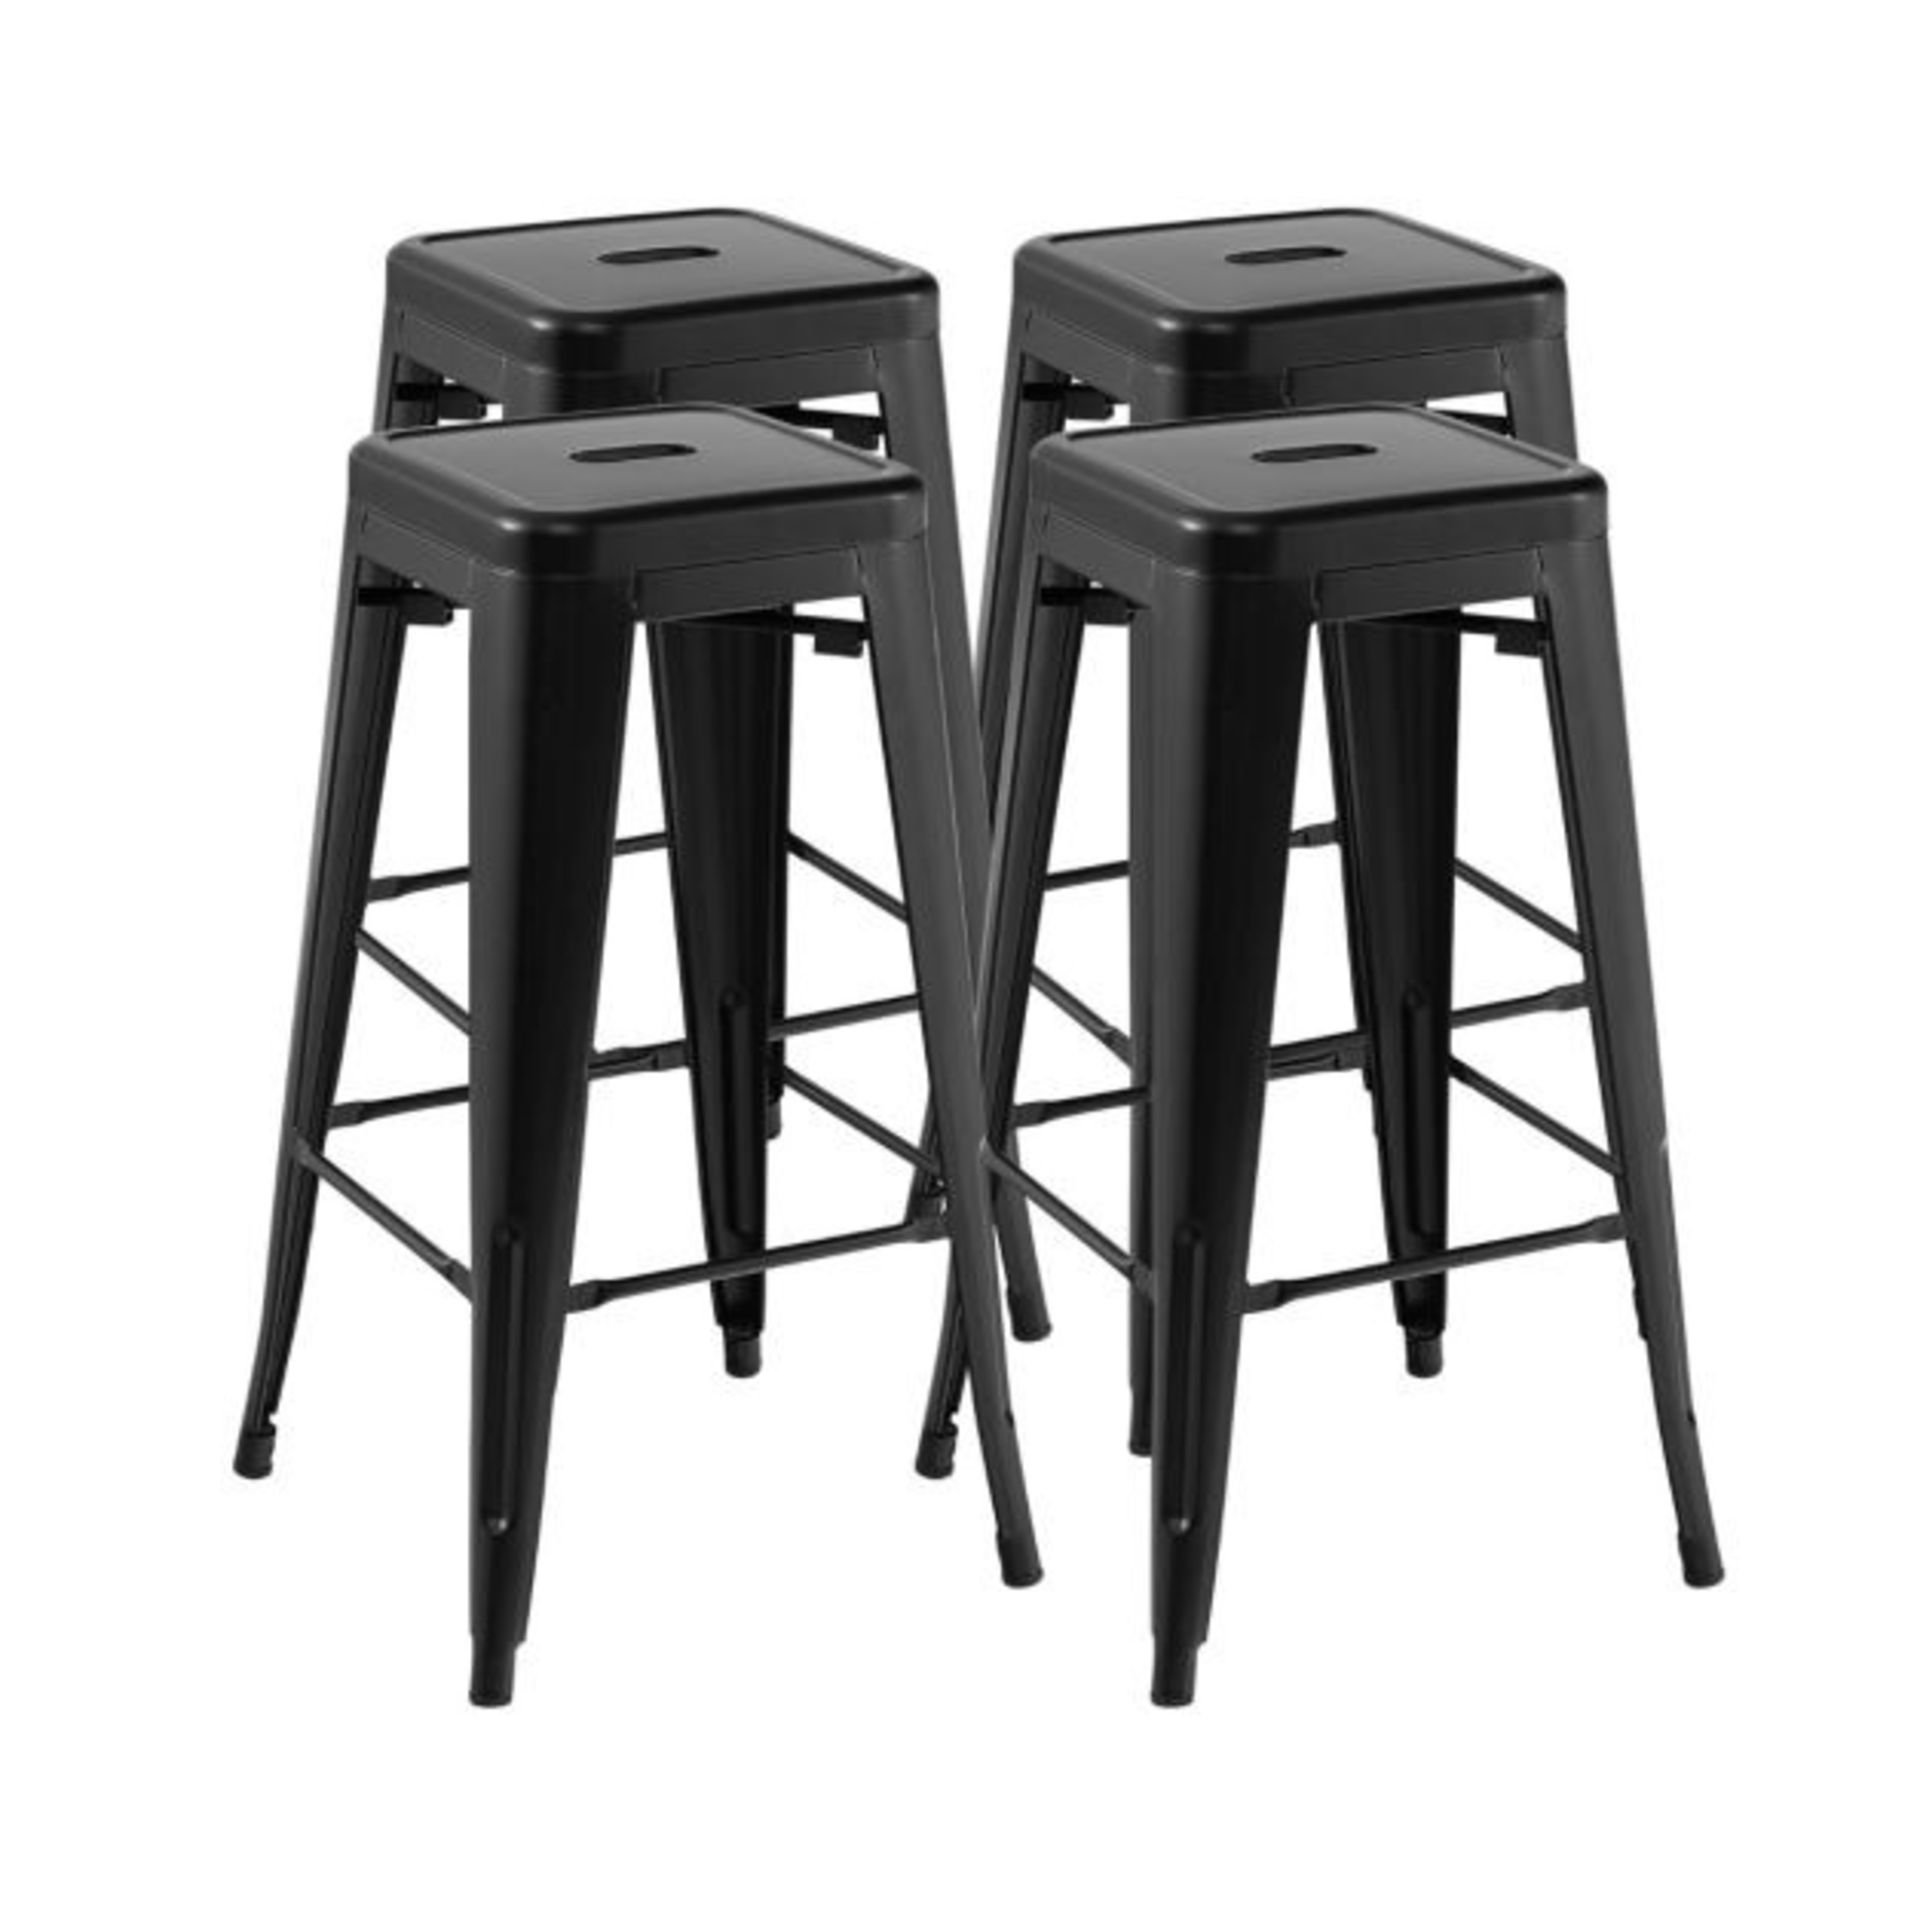 Metal Stools with Square Seat and Handling Hole for Kitchen - ER54